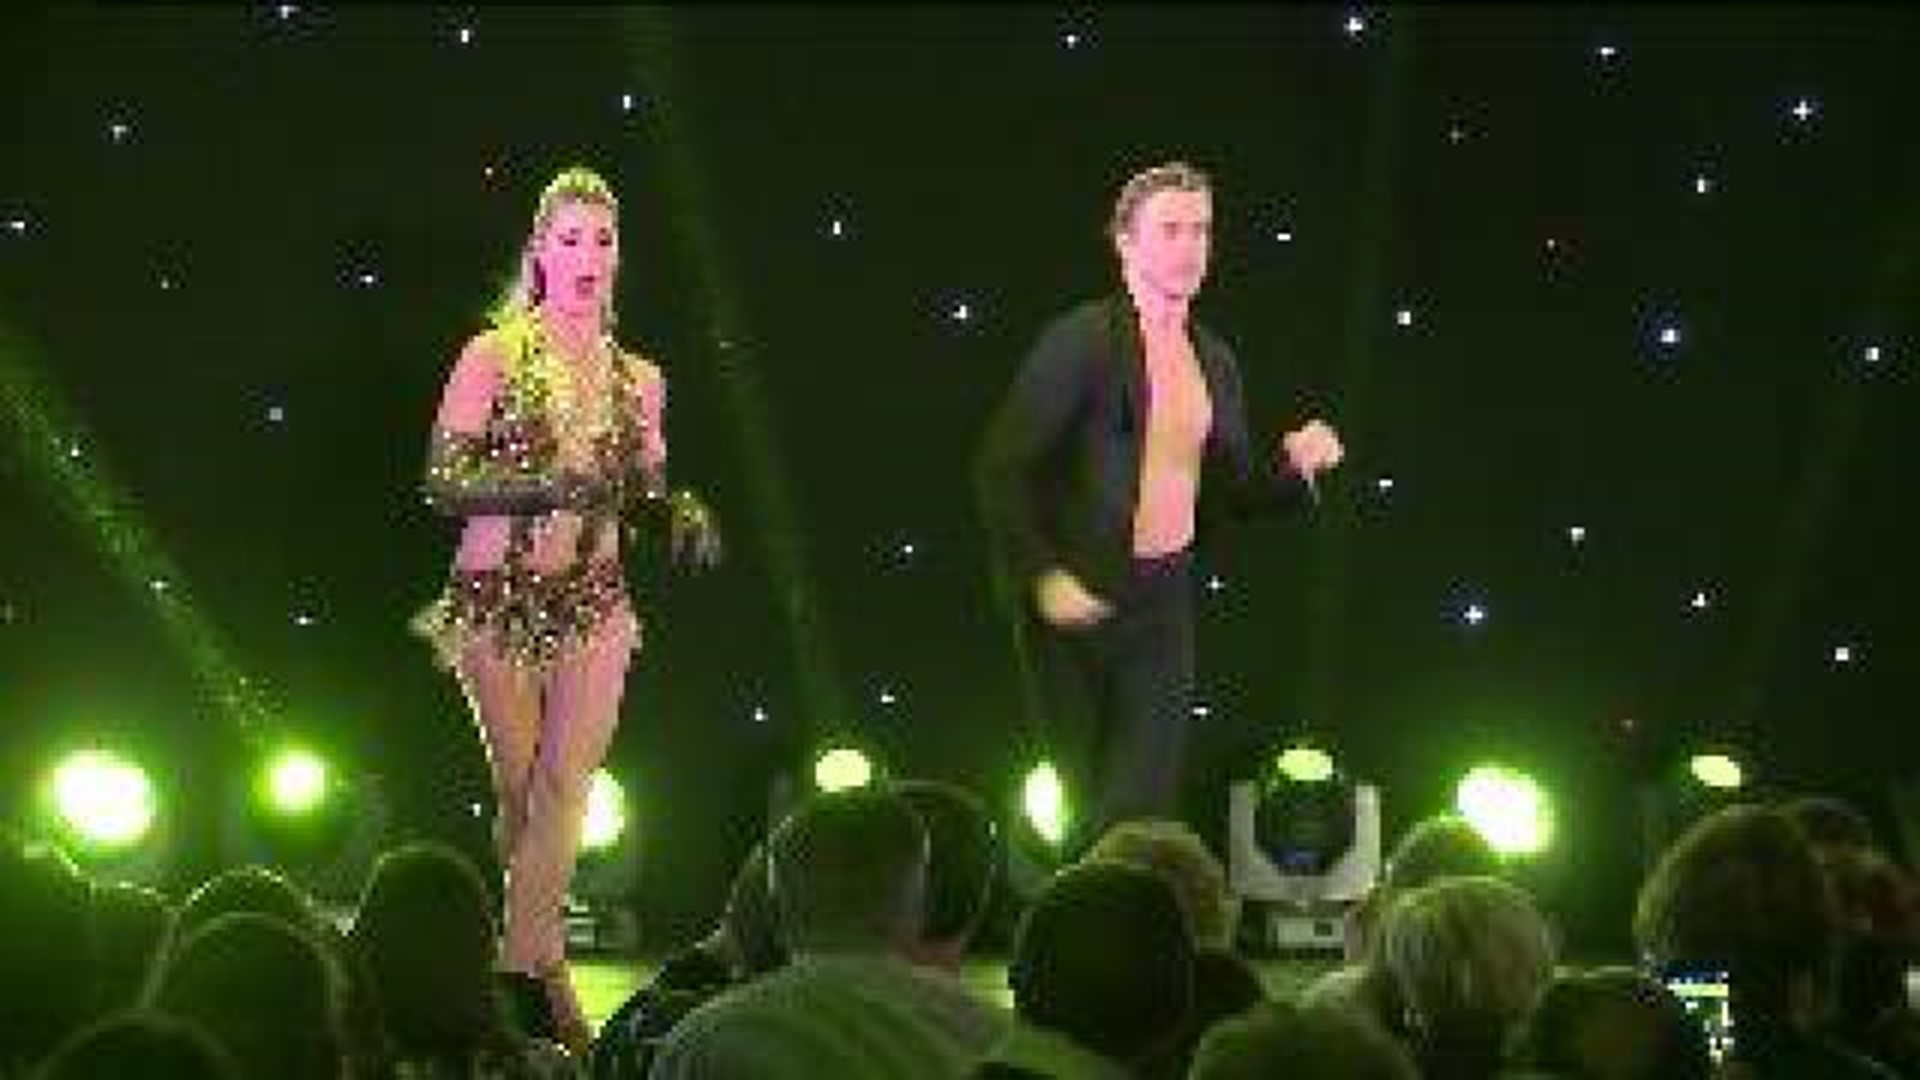 Dancing with Derek Hough and Emma Slater